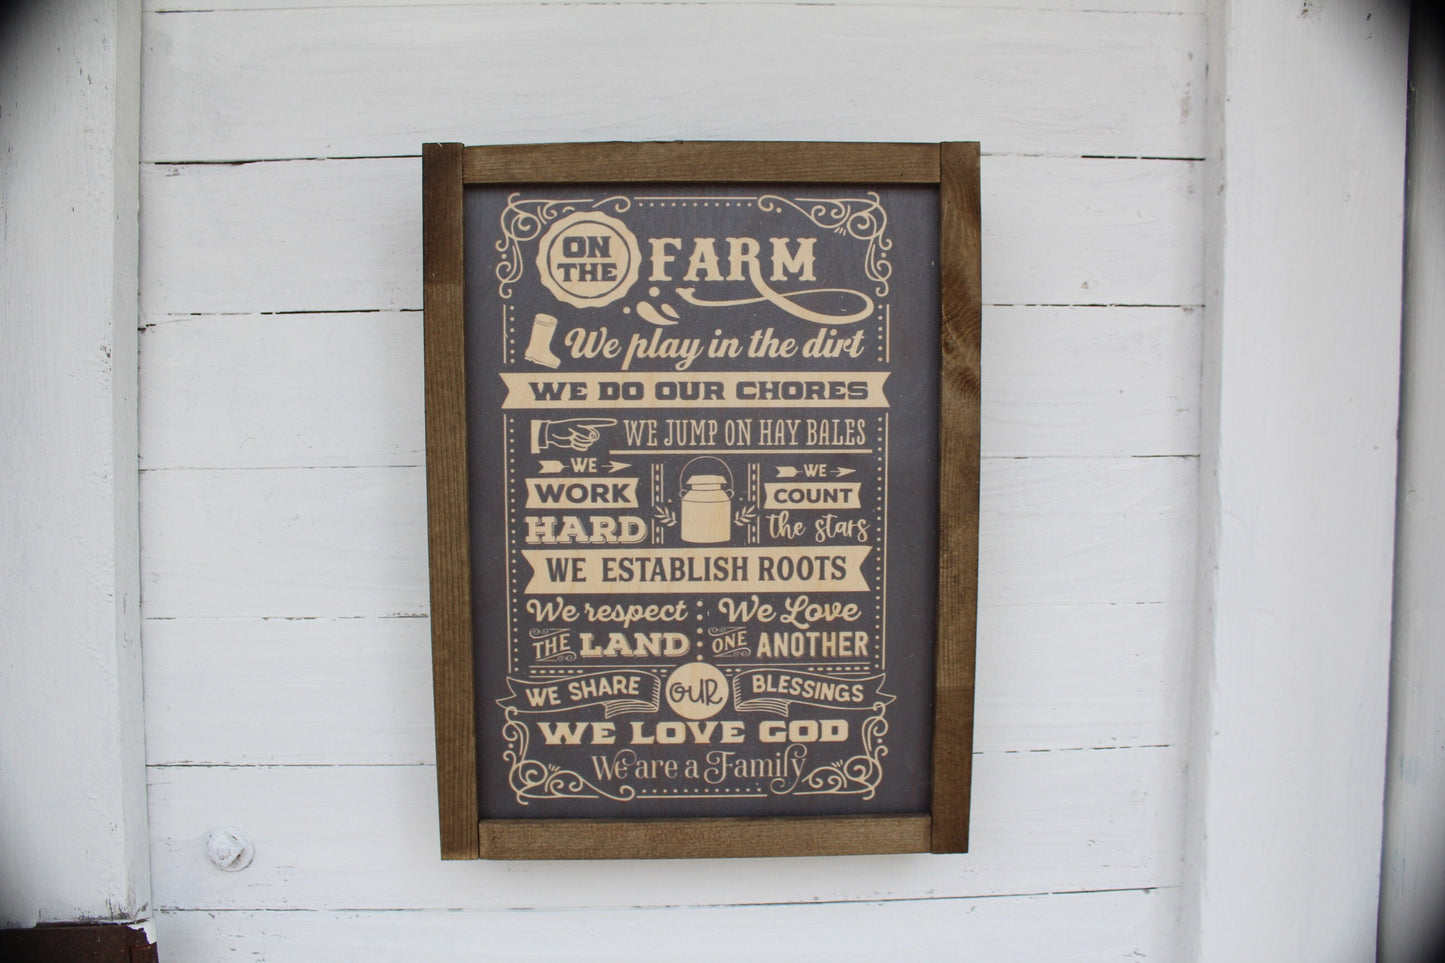 Farm Life Wood Sign On The Farm We List of Quotes Farmhouse Rustic Barn Wood Decoration Play in Dirt Chores Work Hard God Boots Love Land